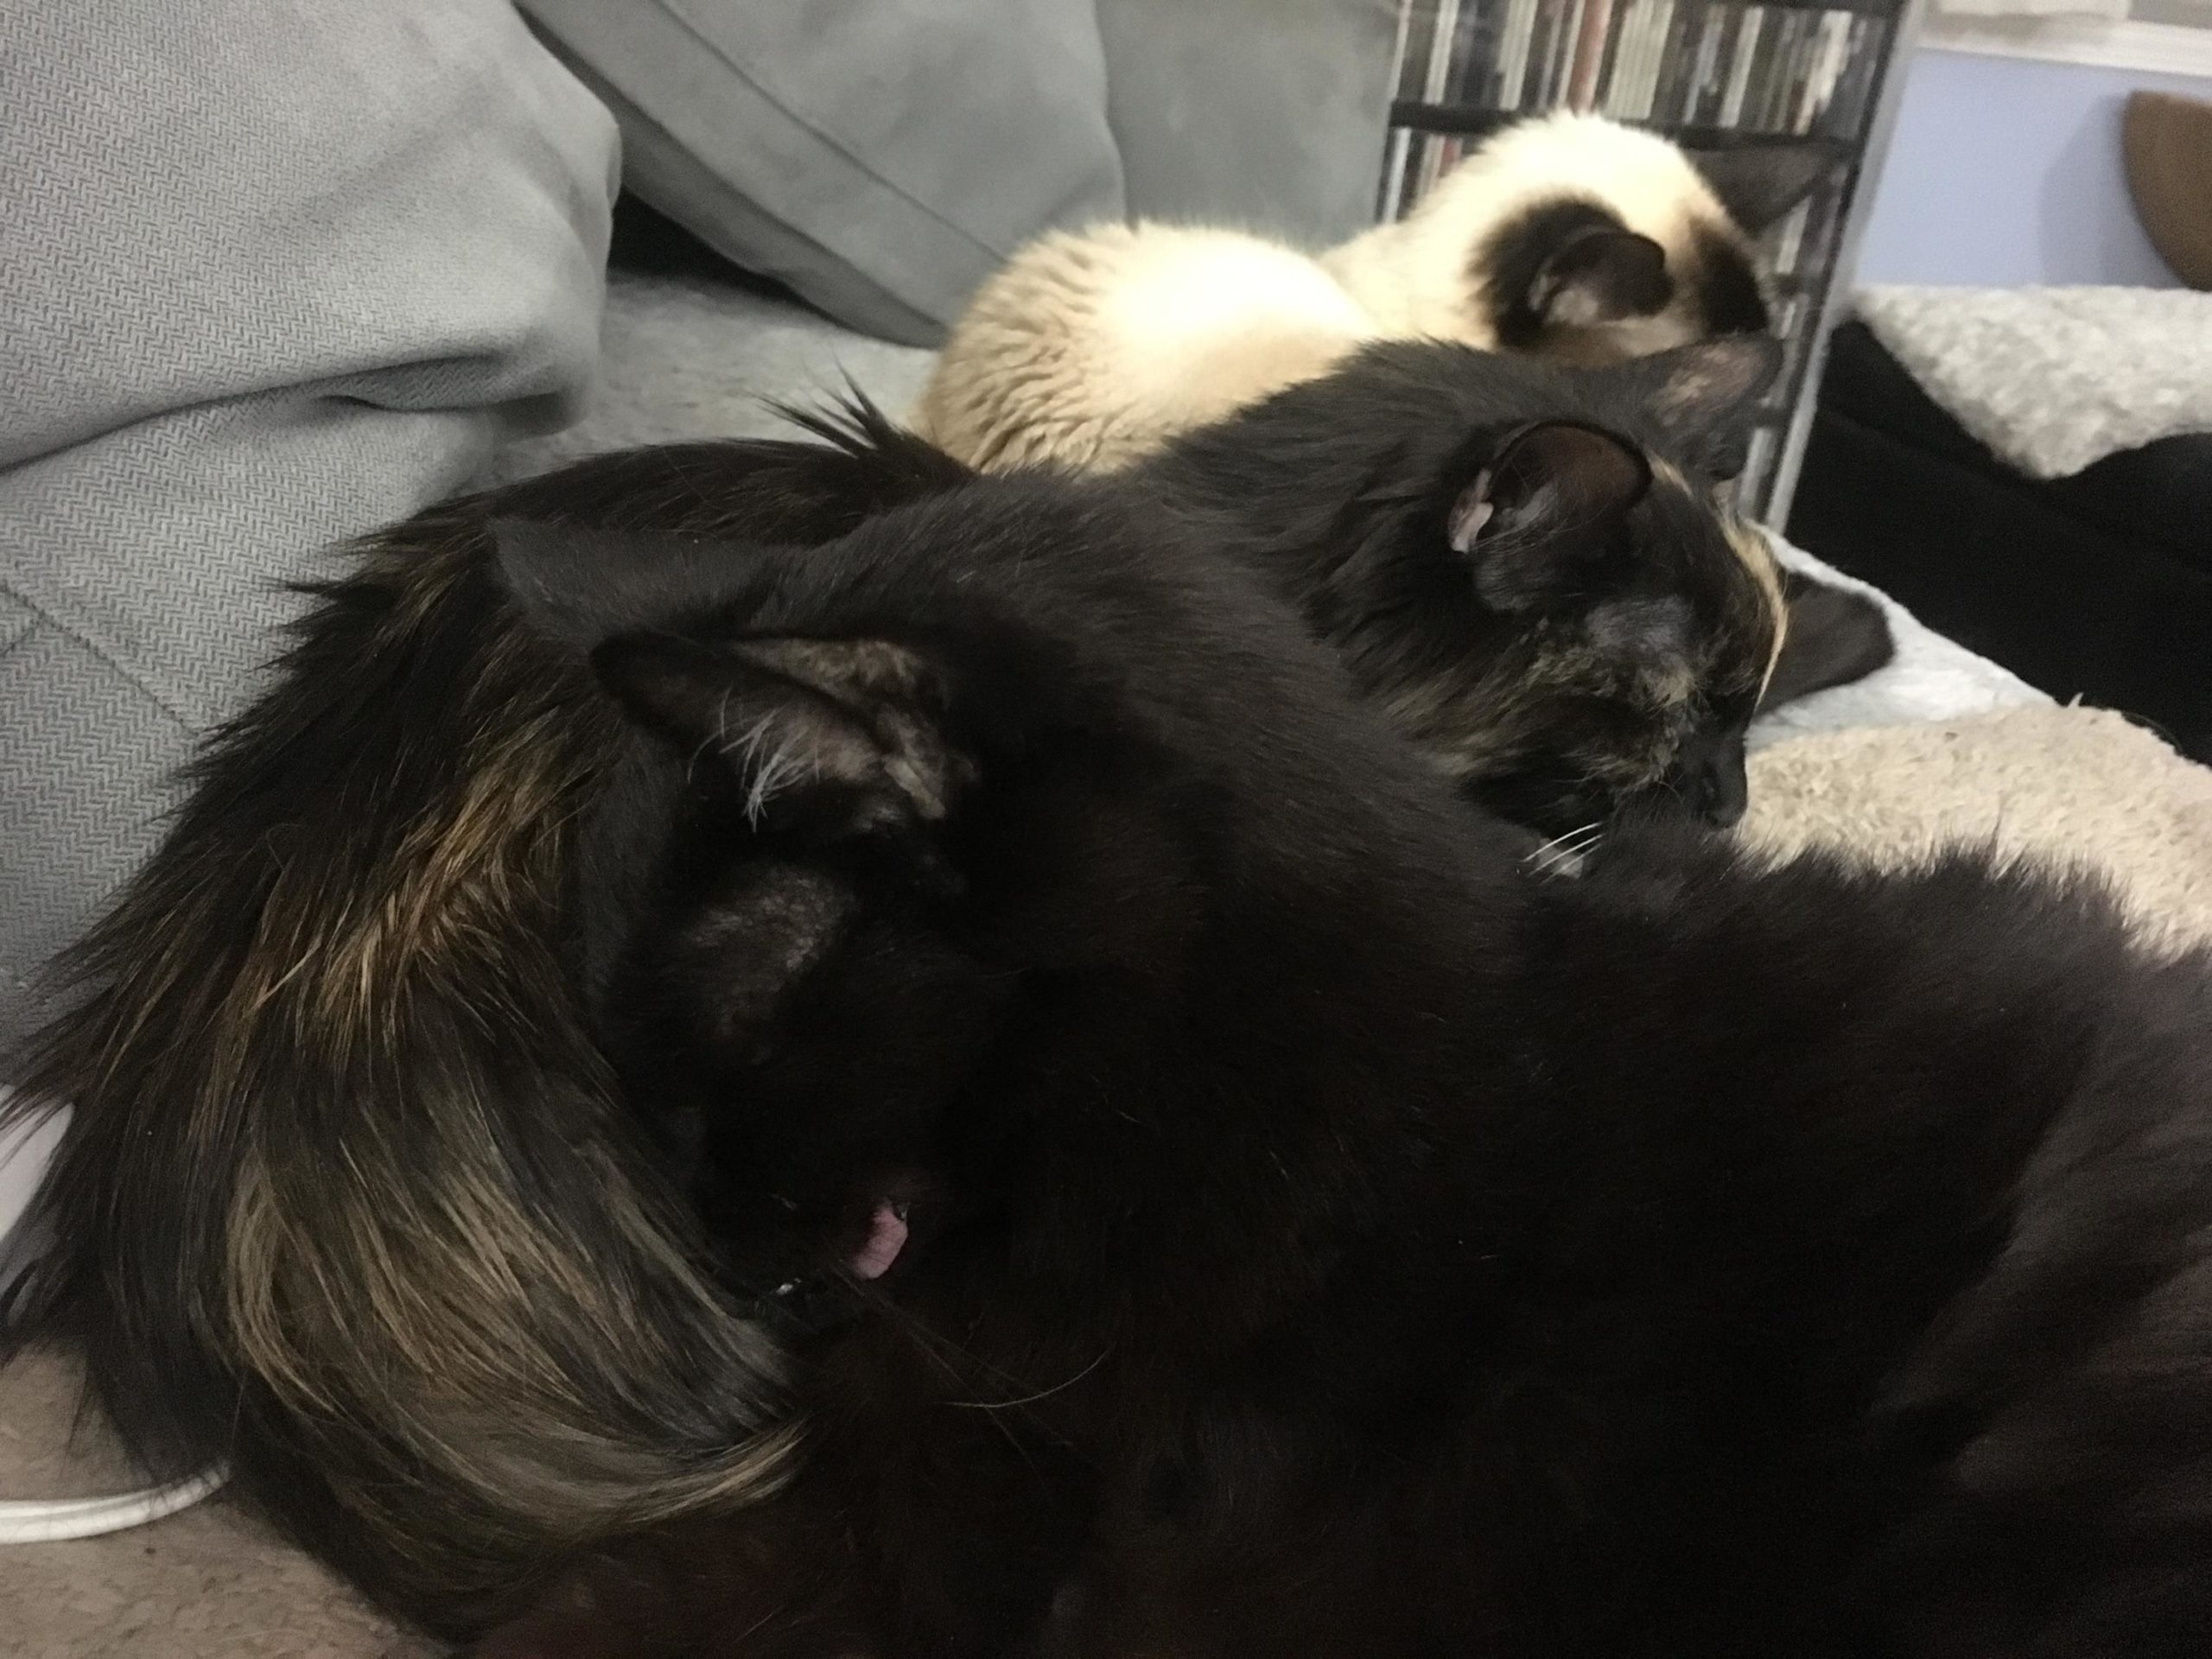 Blepping with his friends!